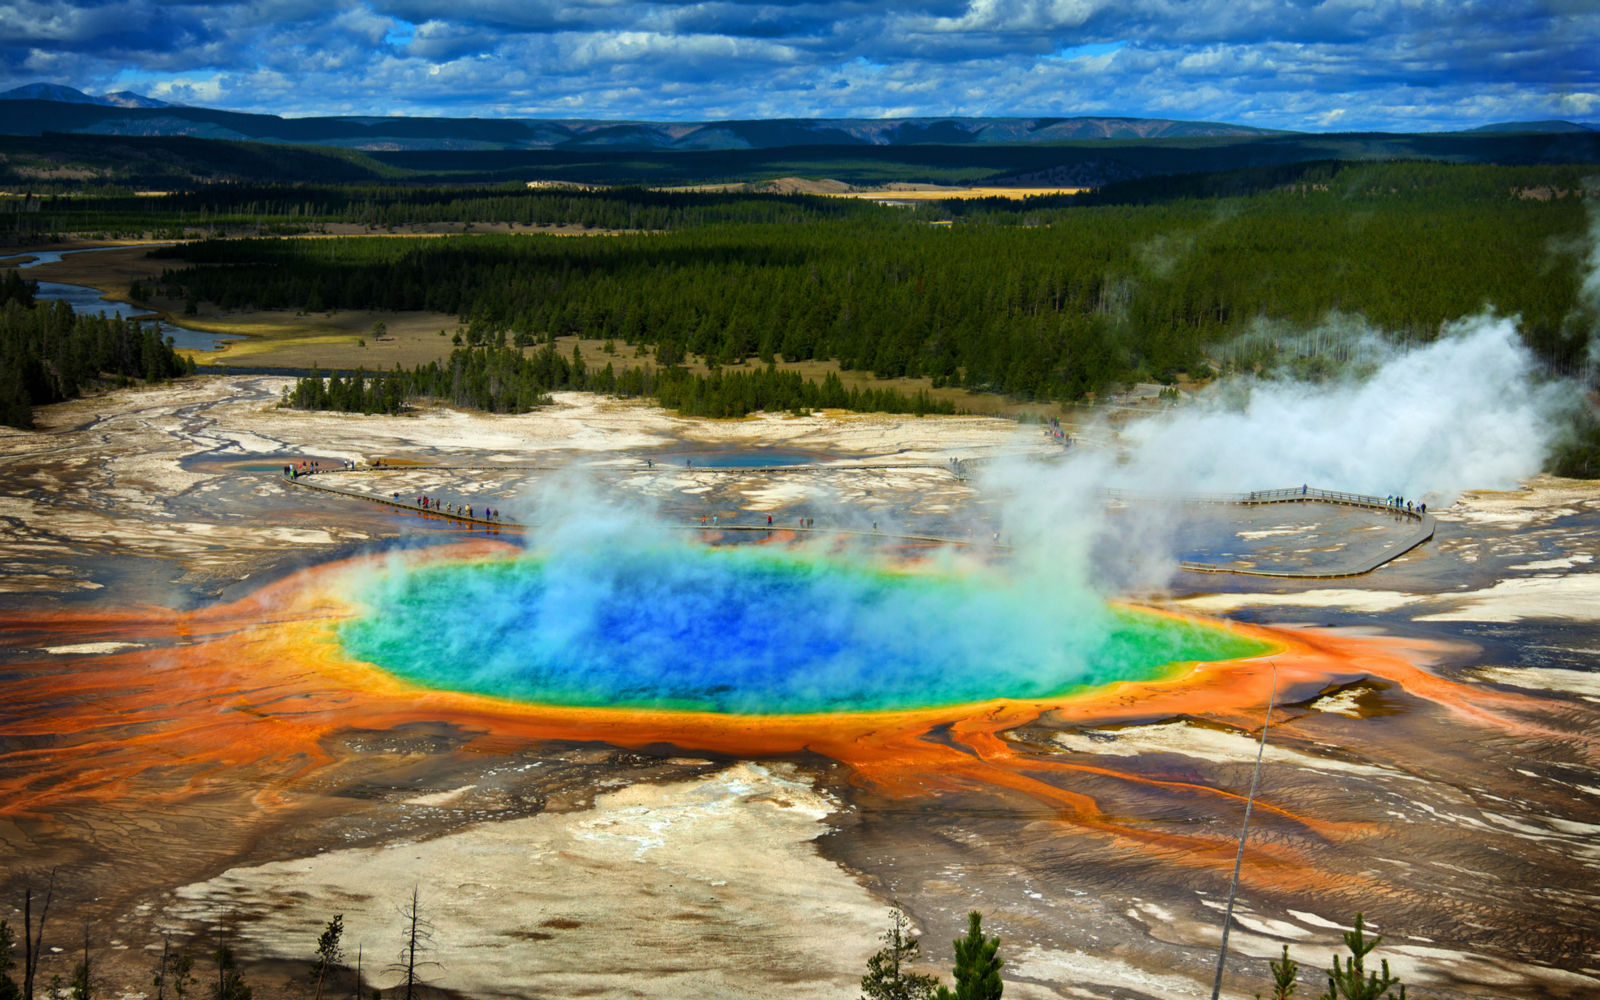 The Best Time to Visit Yellowstone in 2023